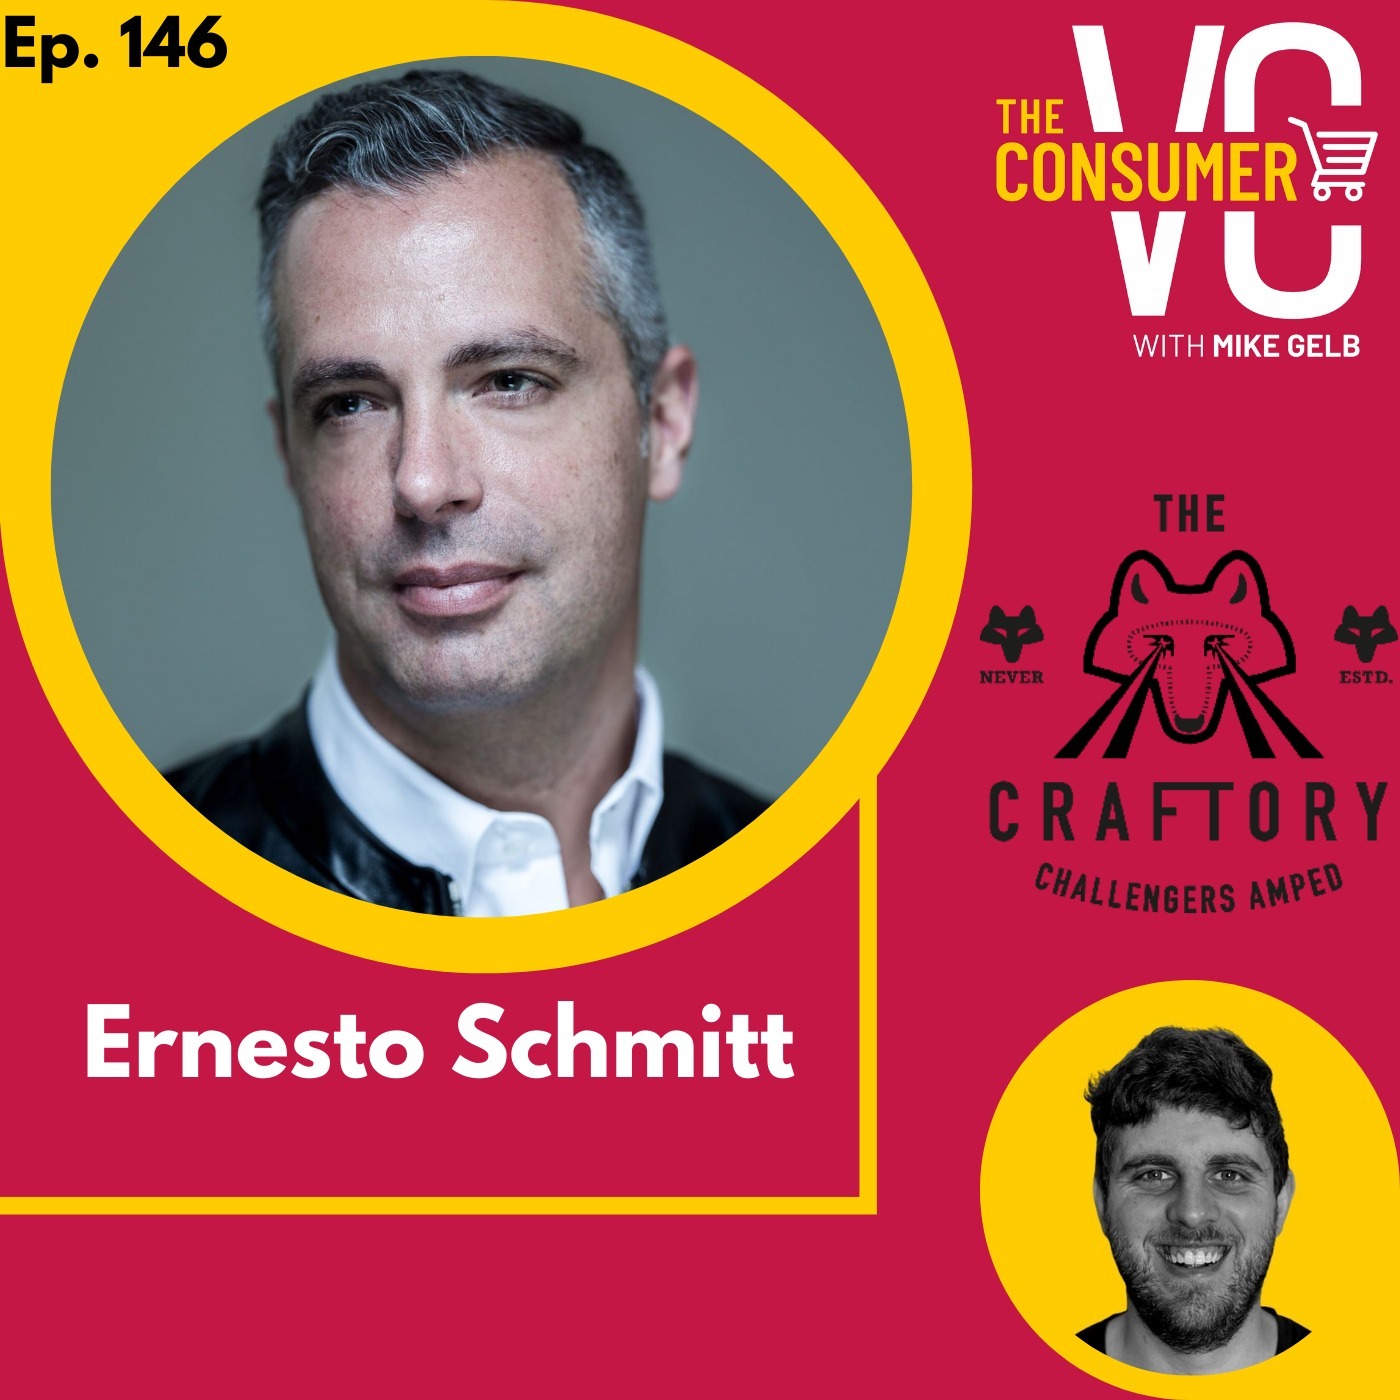 Ernesto Schmitt (The Craftory) - Why digitally native brands should wait to head into retail, and investing globally at the Series A